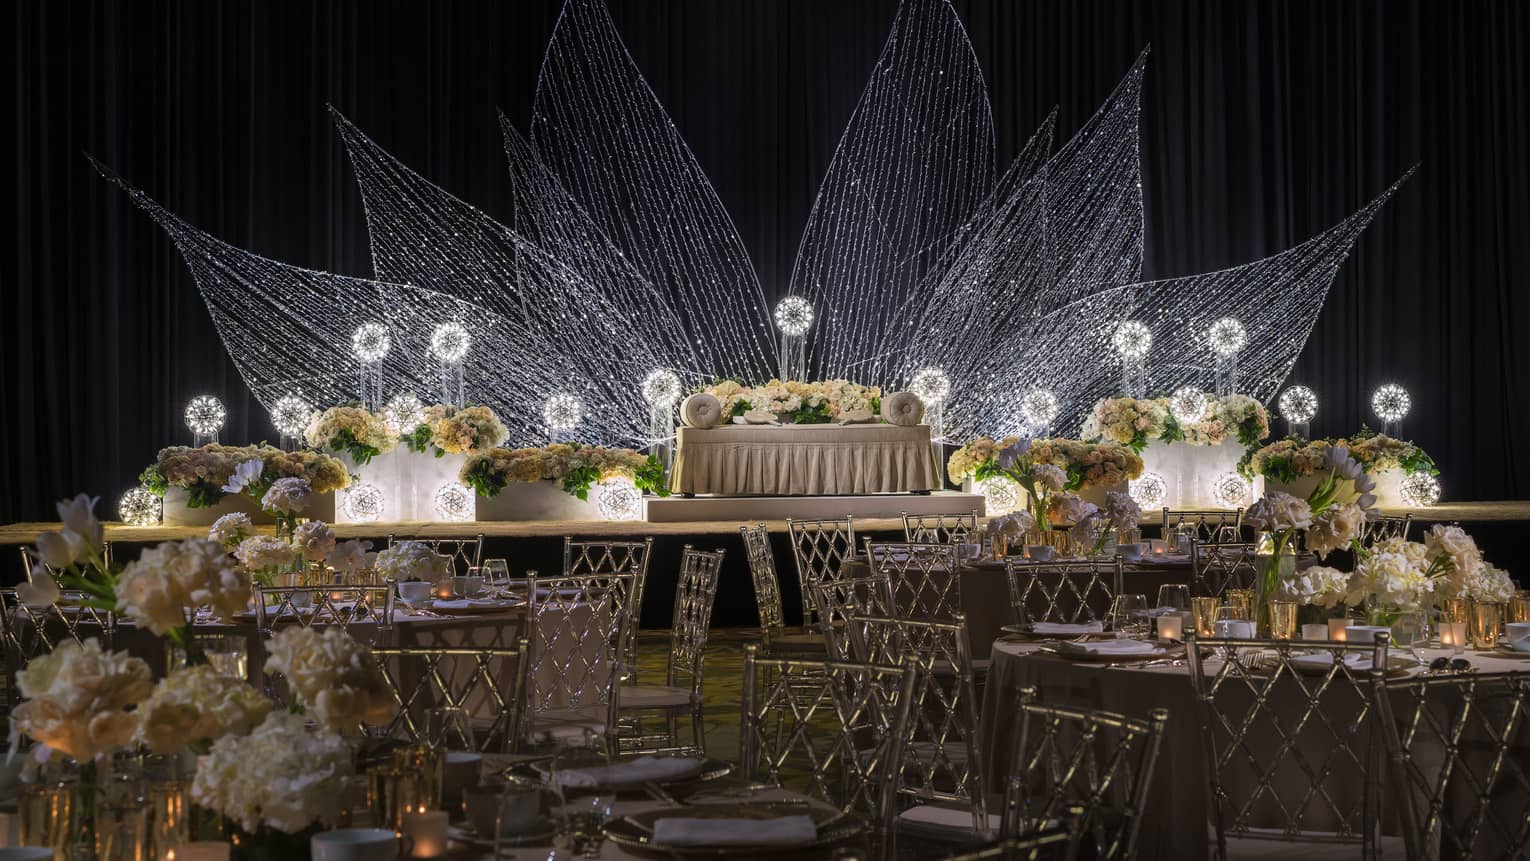 Malay wedding with banquet tables, white loveseat in front of flower light display